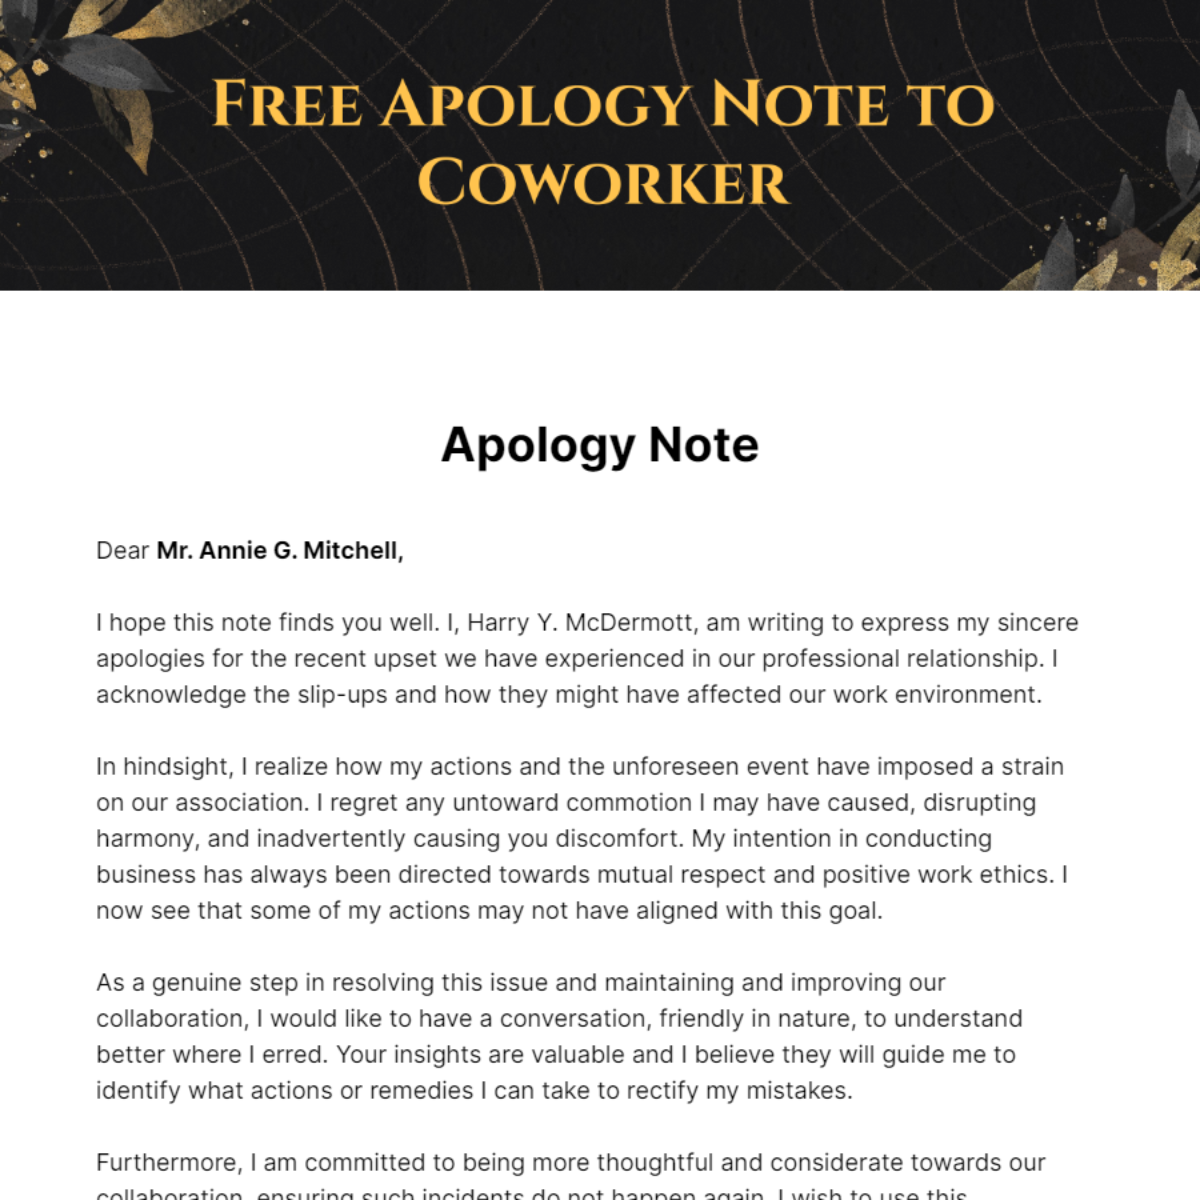 Apology Note to Coworker Template